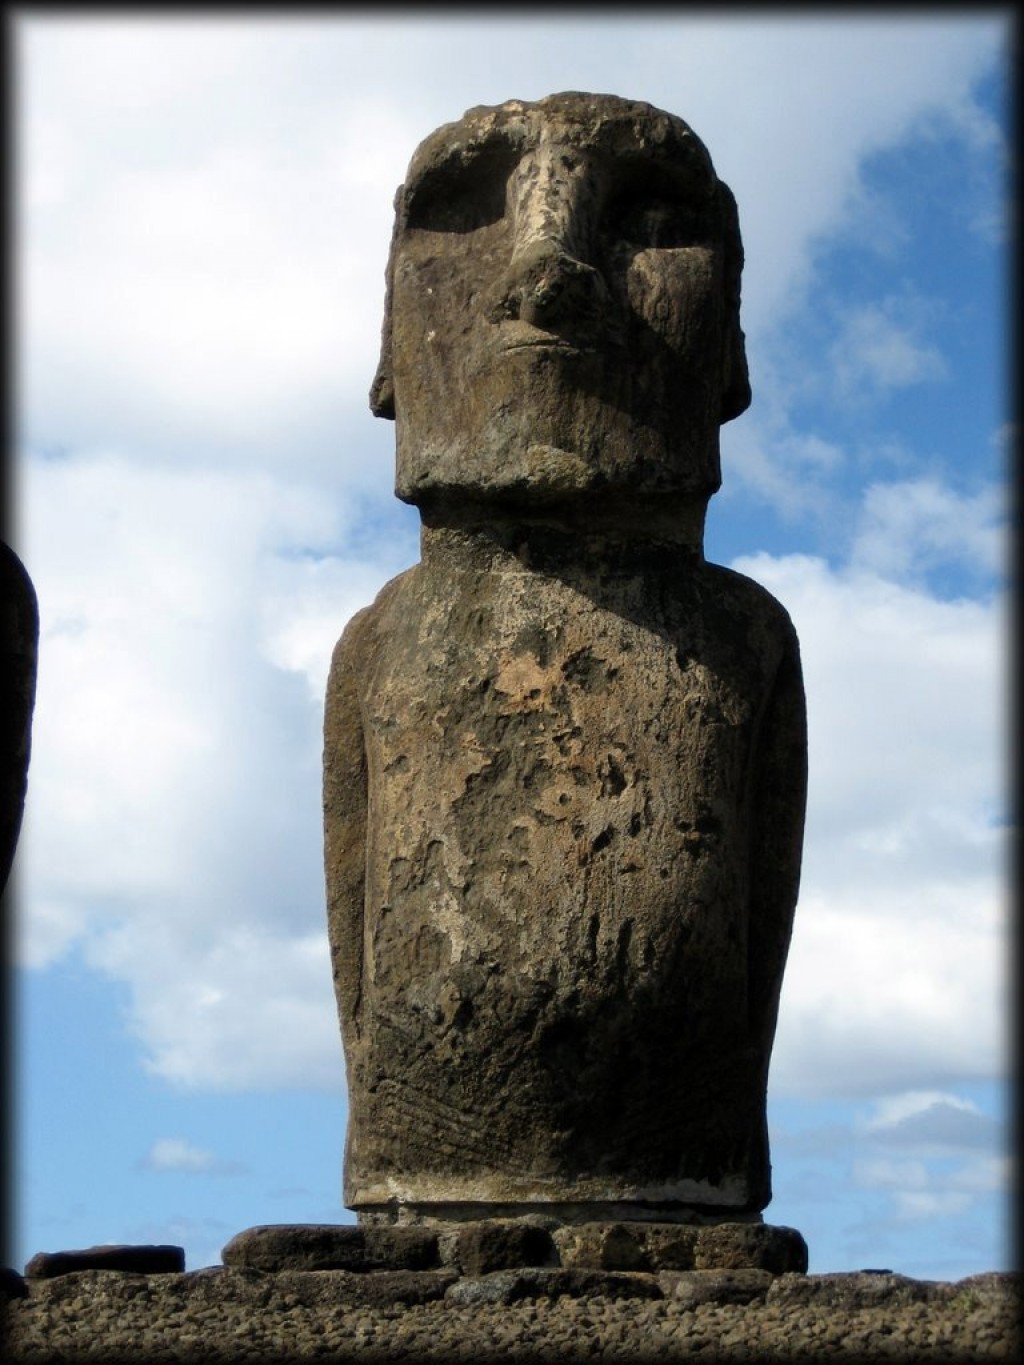 The Moai at Ahu Tongariki were  reconstructed by a large team of scientists and local experts (1992/5). A Japanese company financed part of the work.

The monument, in ruins before the arrival of Europeans explorers of the 18 century (15 statues down and broken), was completely destroyed by a tsunami originated in Chile (22 May, 1960) as the main consequence of the most important earthquake ever recorded in human history (9.5) not by a cyclone that would not have any effect on a megalithic structure.
